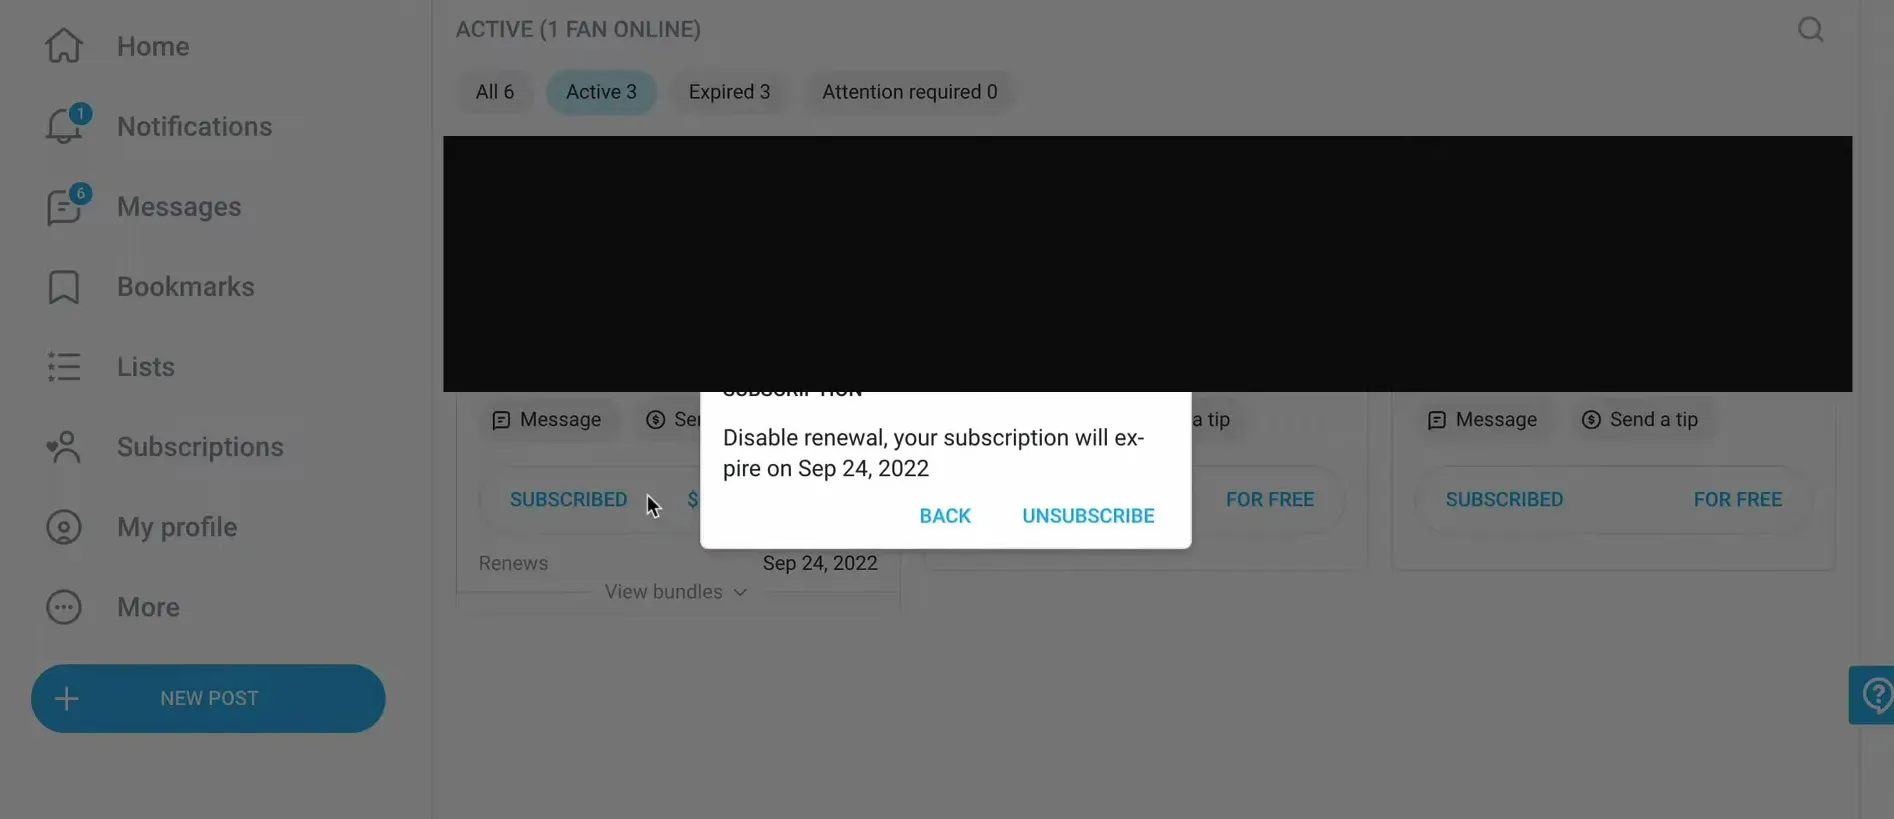 click unsubscribe to cancel auto renewal your account subscription